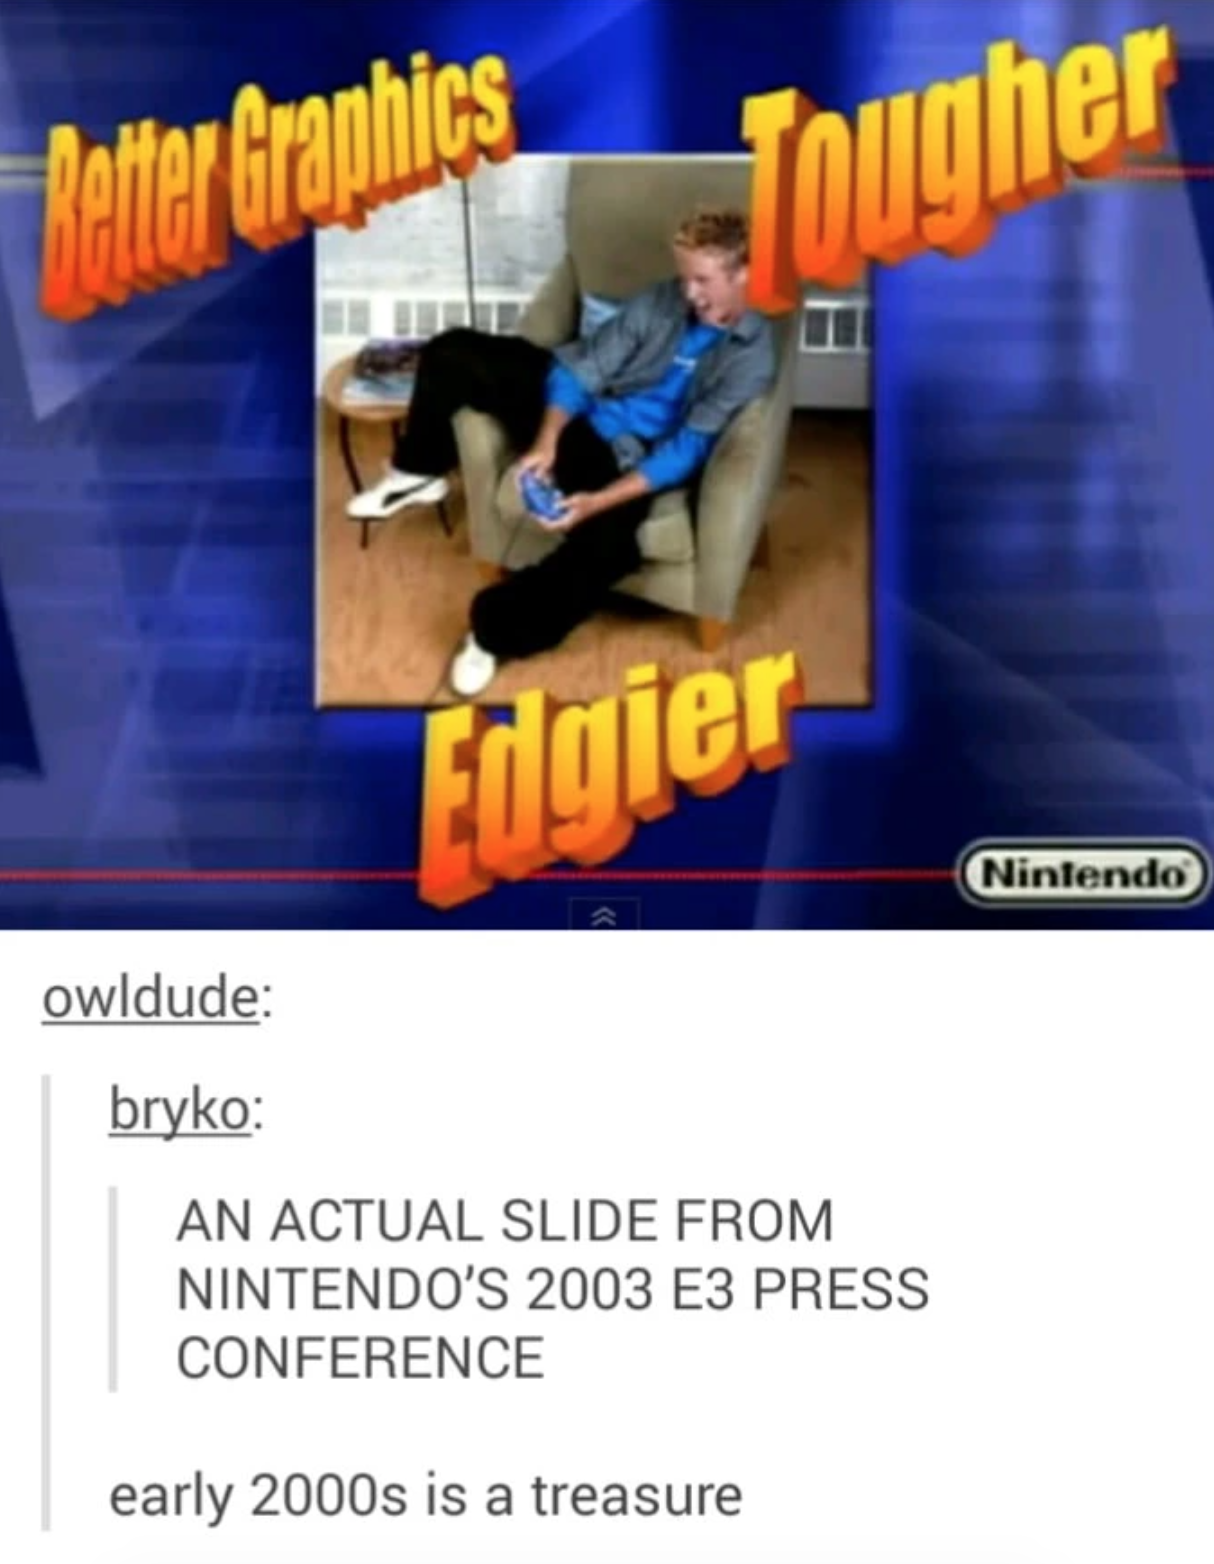 gaming memes and pics - games - Petter Graphics fougher Engier Nintendo owldude bryko An Actual Slide From Nintendo'S 2003 E3 Press Conference early 2000s is a treasure